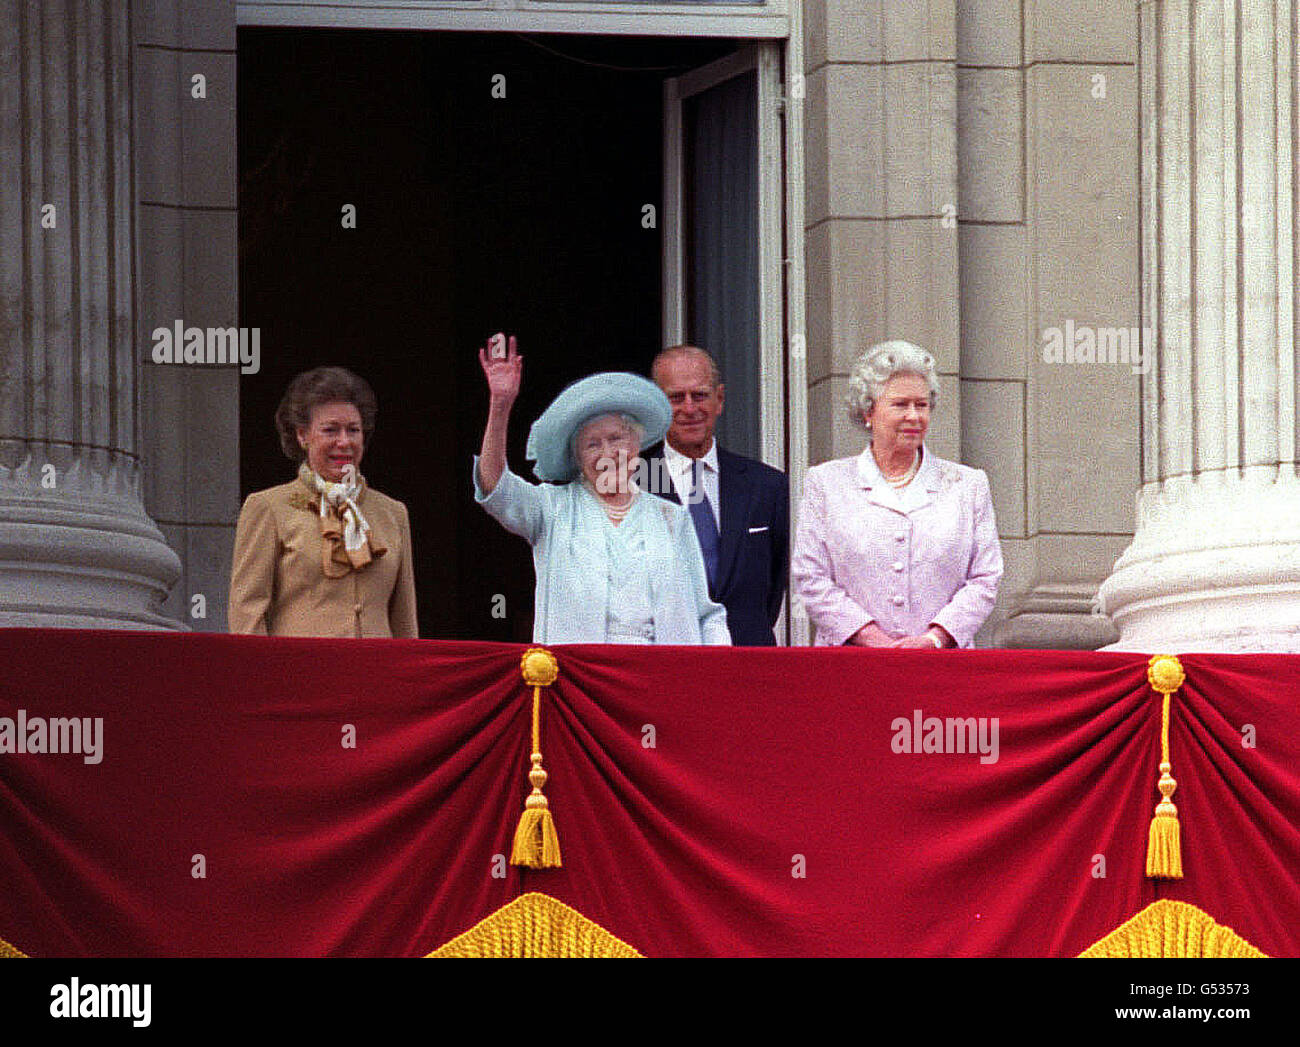 The Queen Mother, with her two daughters Princess Margaret (L) and The Queen with the Duke of Edinburgh, wave to the crowds from the balcony of Buckingham Palace, as she celebrates her 100th birthday. * Thousands of people have flocked to the streets outside Buckingham Palace to cheer the Queen Mother, the longest living royal in the history of the British monarchy. Stock Photo